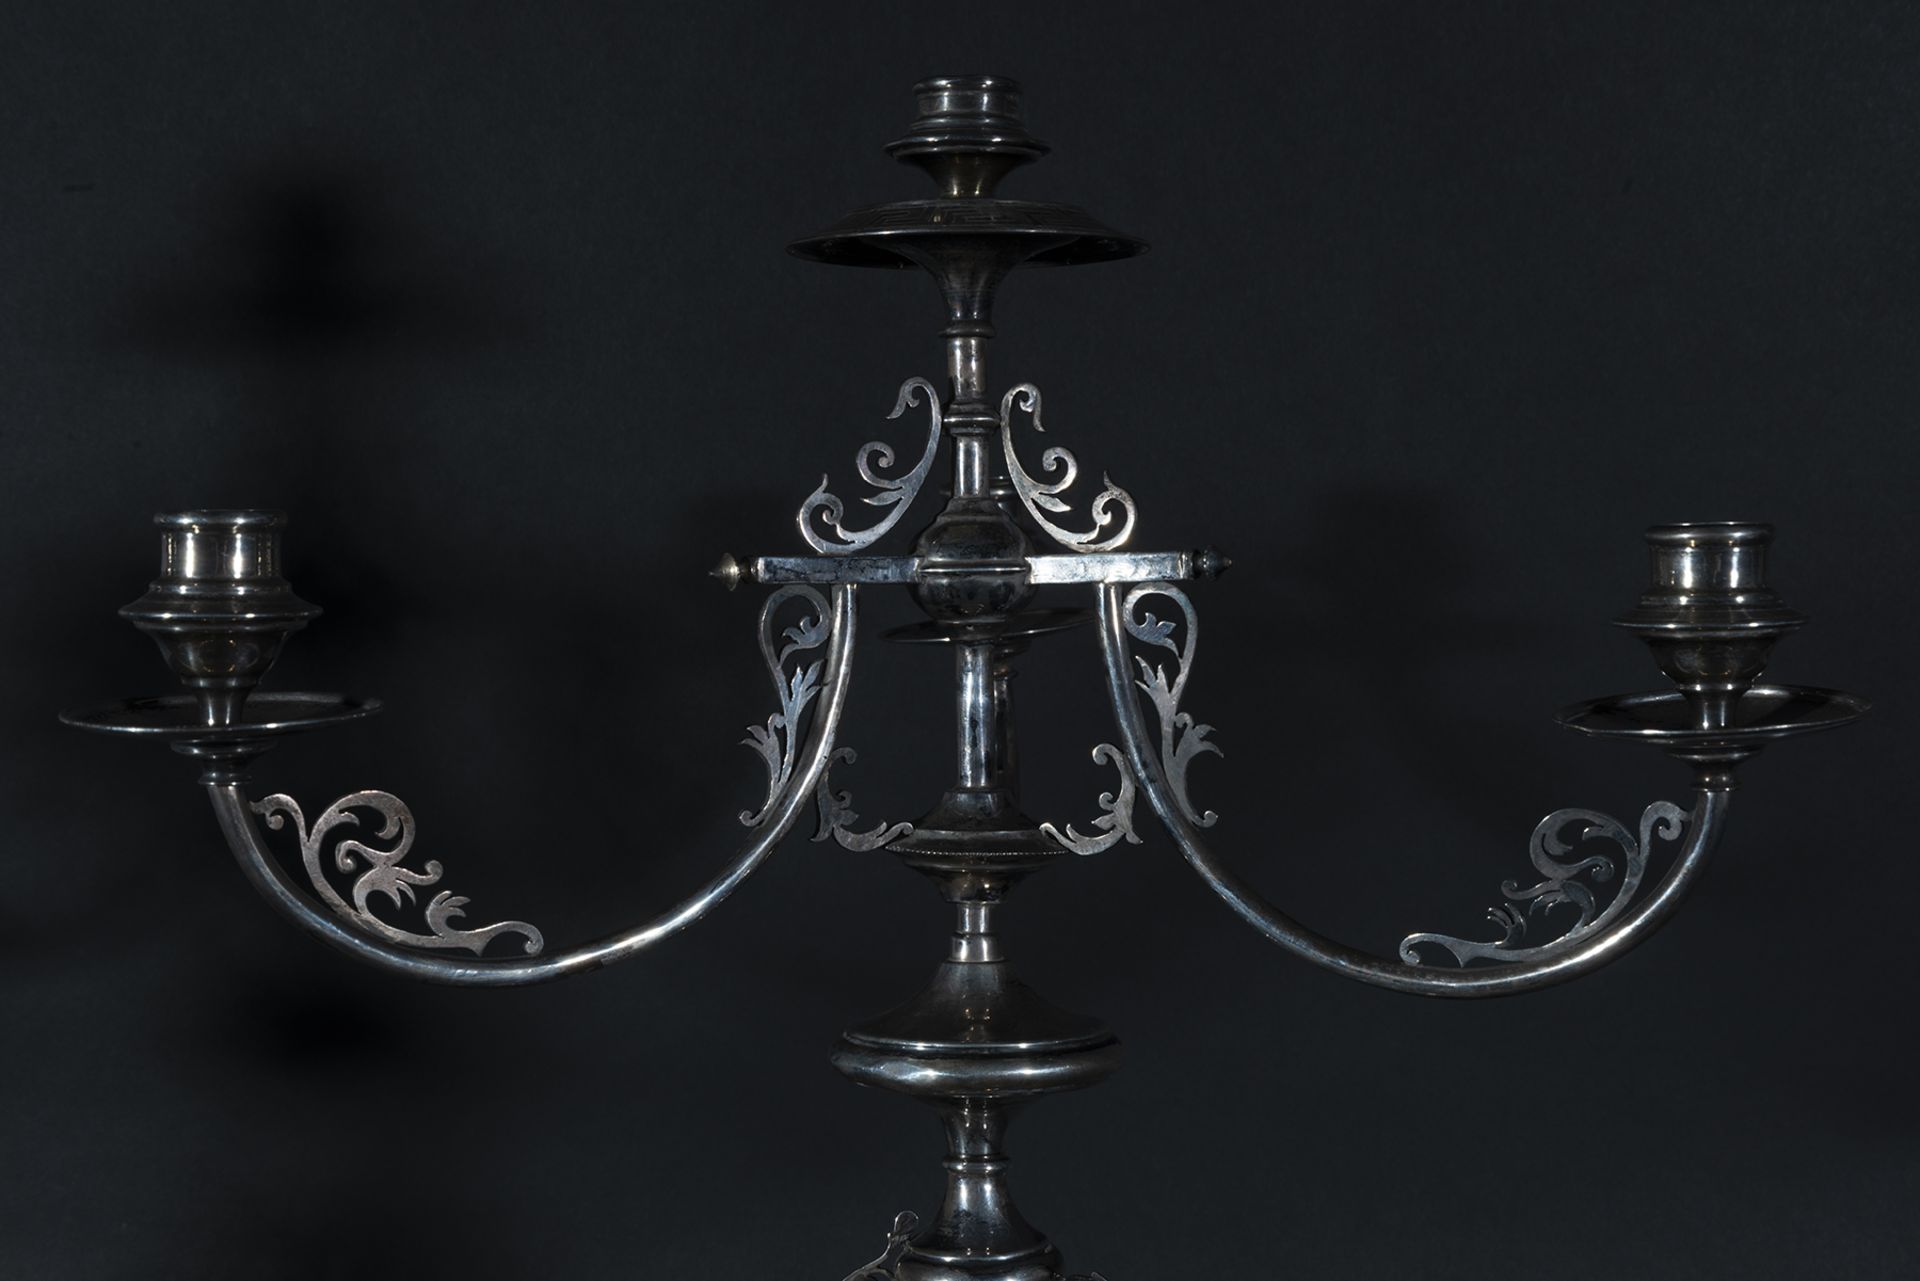 Elegant Pair of Candelabras in Spanish Sterling Silver, contrast 925, silversmith's marks, Granada,  - Image 2 of 6